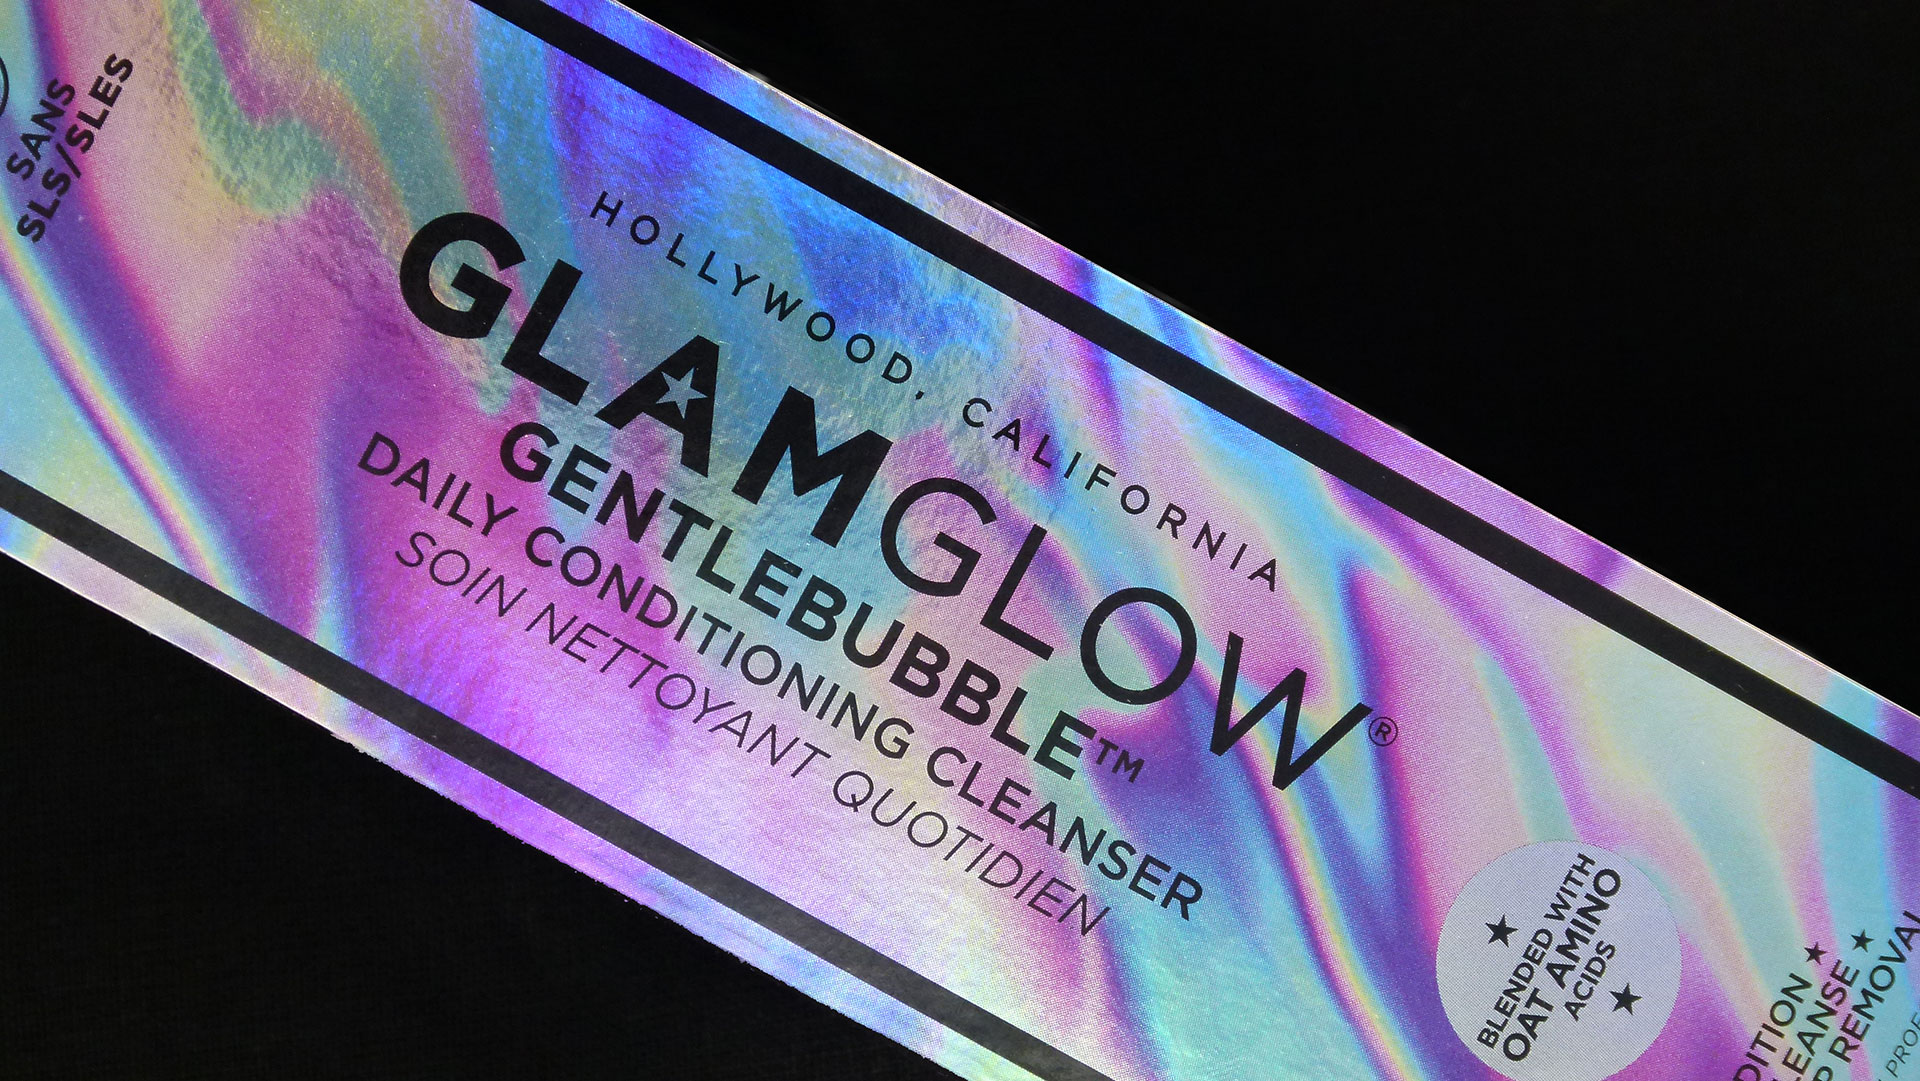 GLAMGLOW packaging from Mainline Holographics